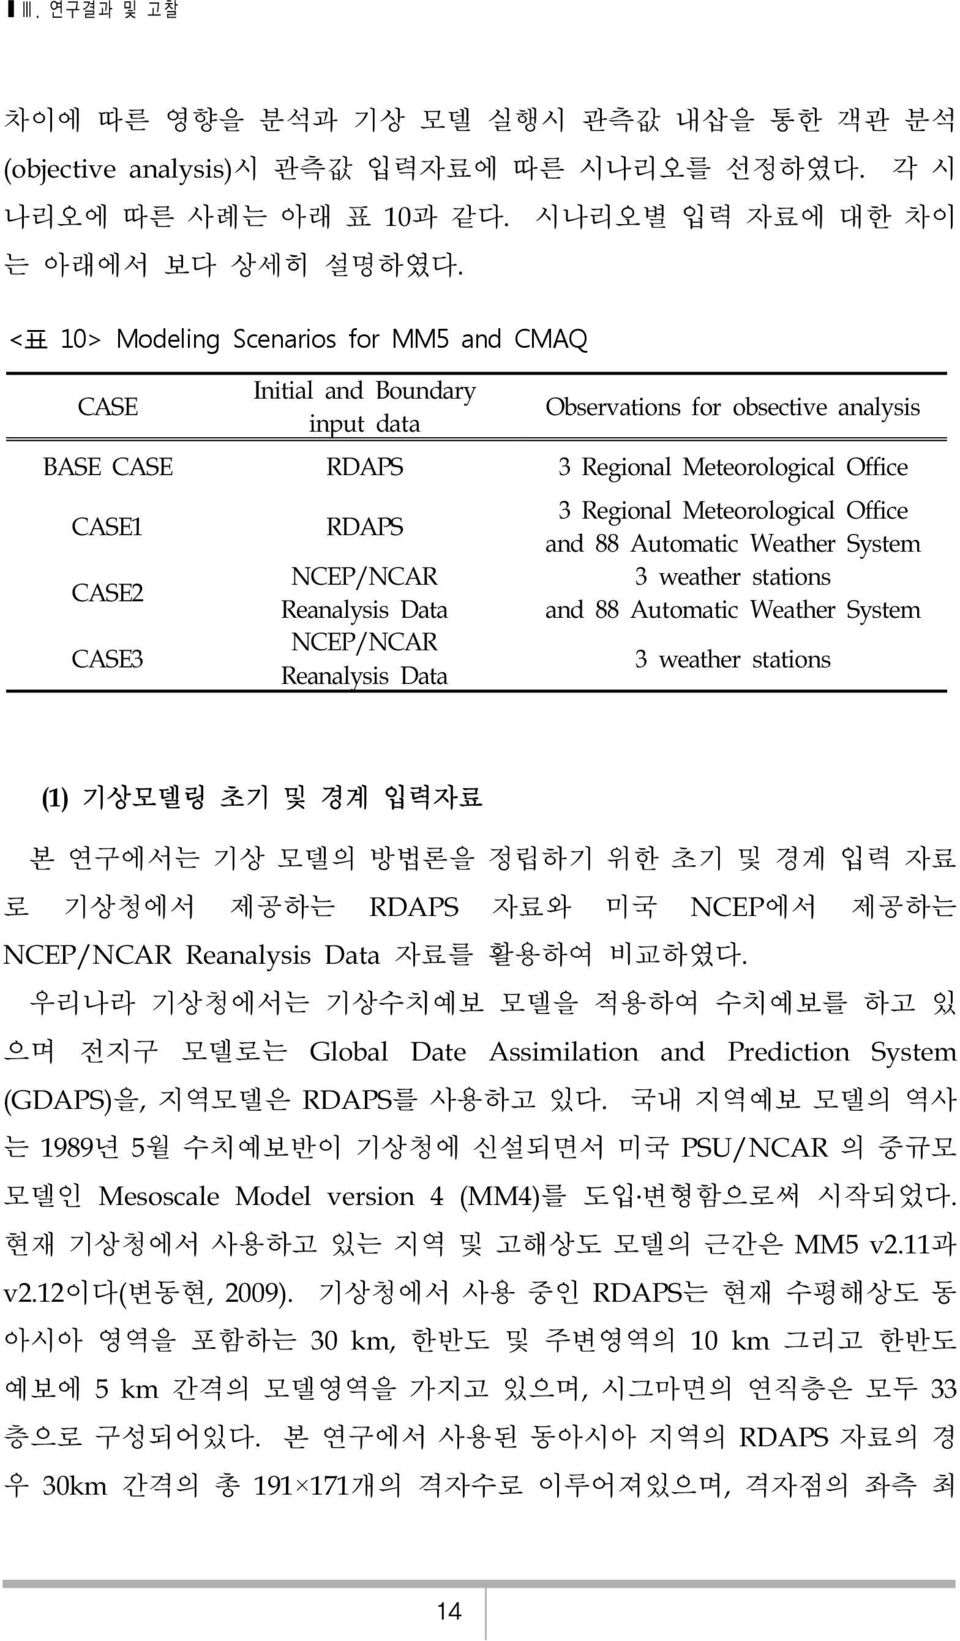 Reanalysis Data NCEP/NCAR Reanalysis Data 3 Regional Meteorological Office and 88 Automatic Weather System 3 weather stations and 88 Automatic Weather System 3 weather stations (1) 기상모델링 초기 및 경계 입력자료